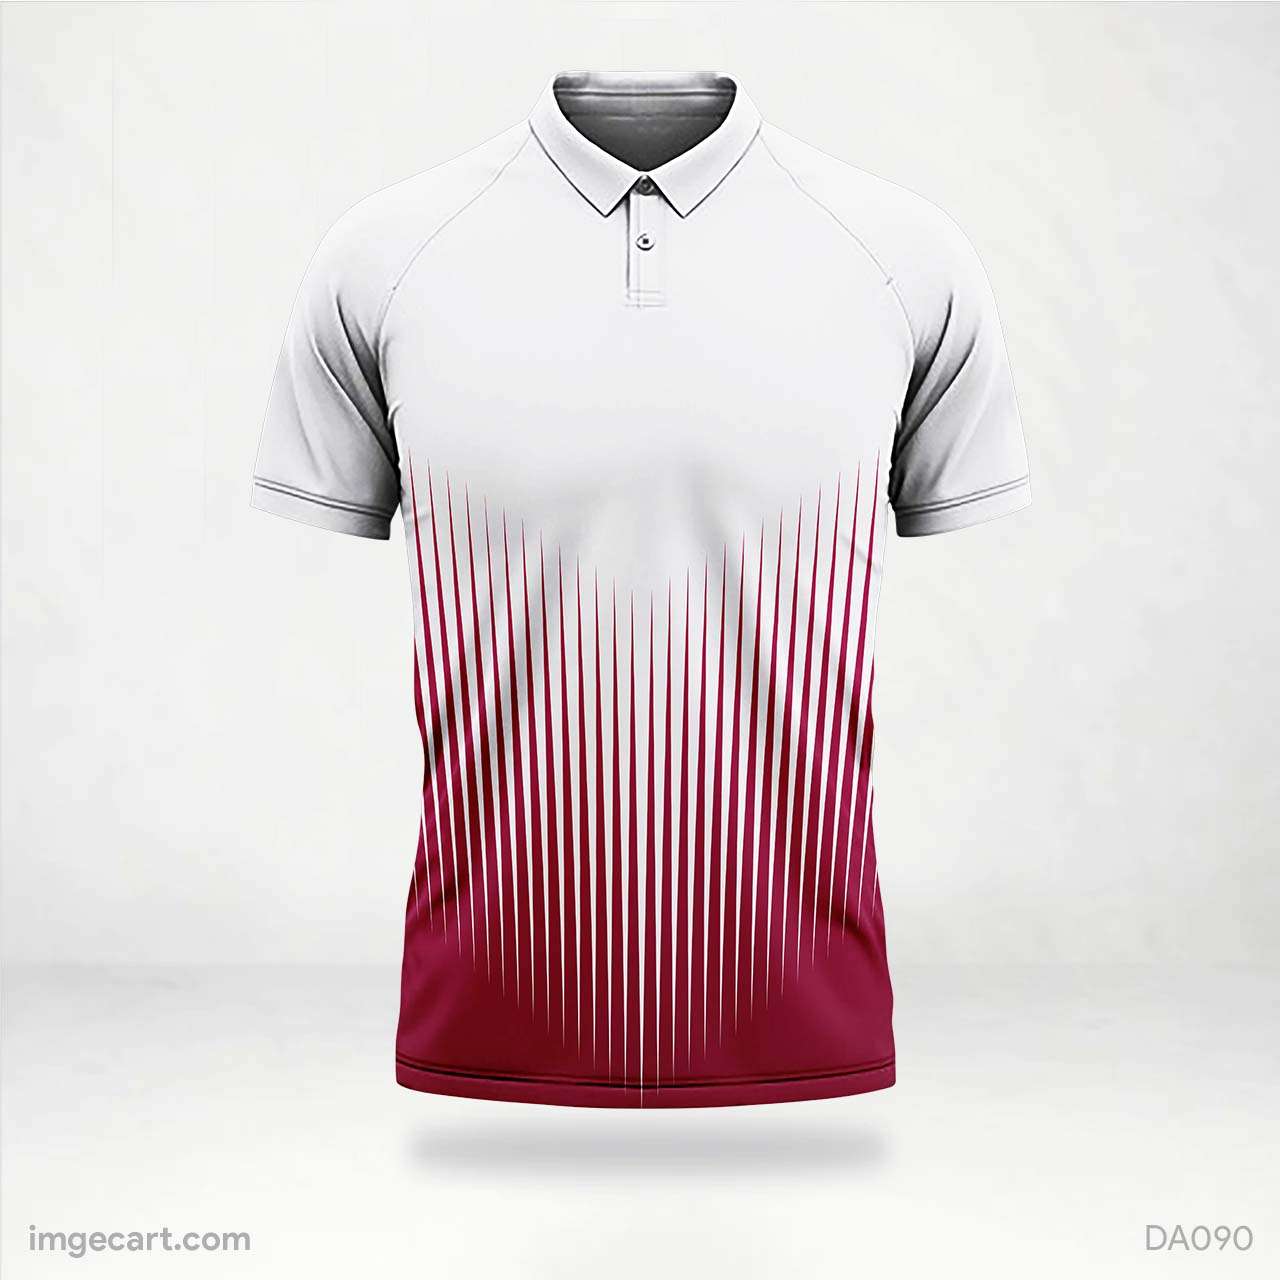 Cricket Jersey Design white with Pink Line Effect - imgecart